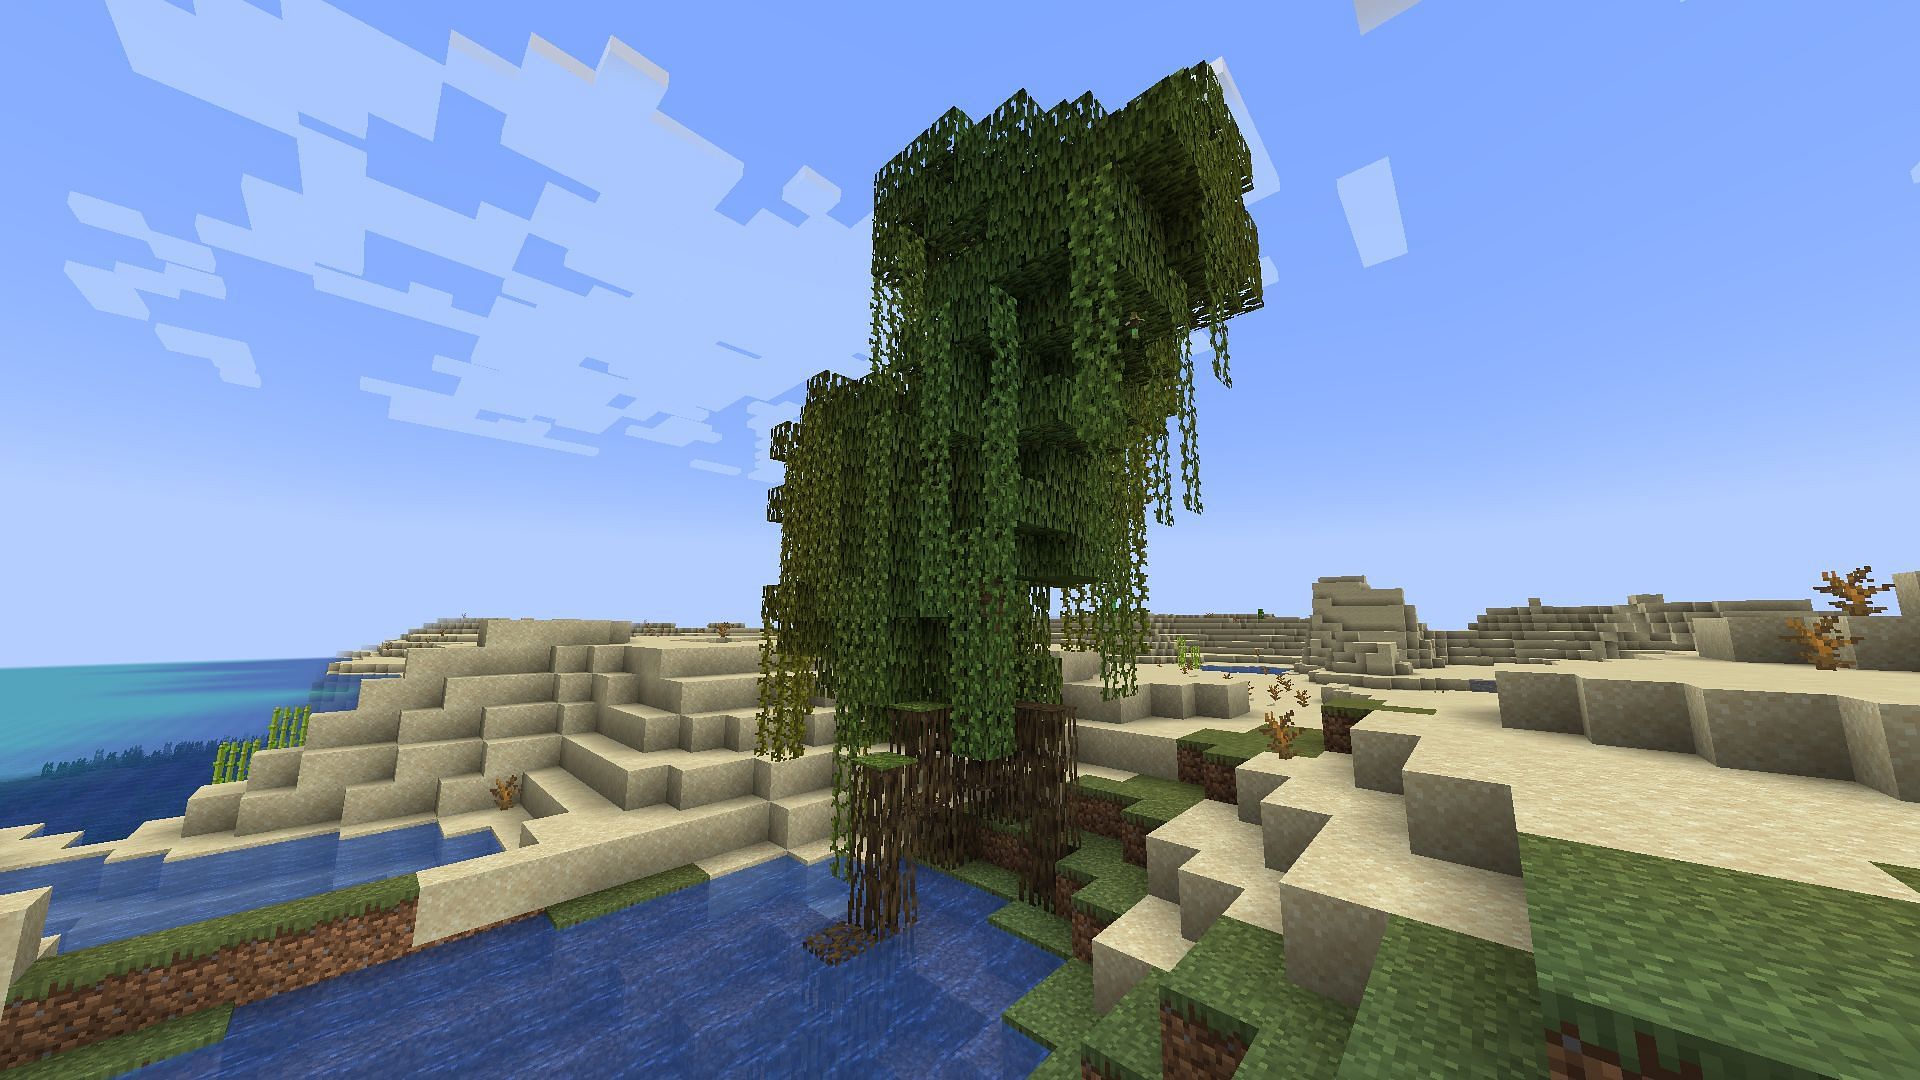 The tree can grow in any biome with the propagule (Image via Minecraft 1.19)